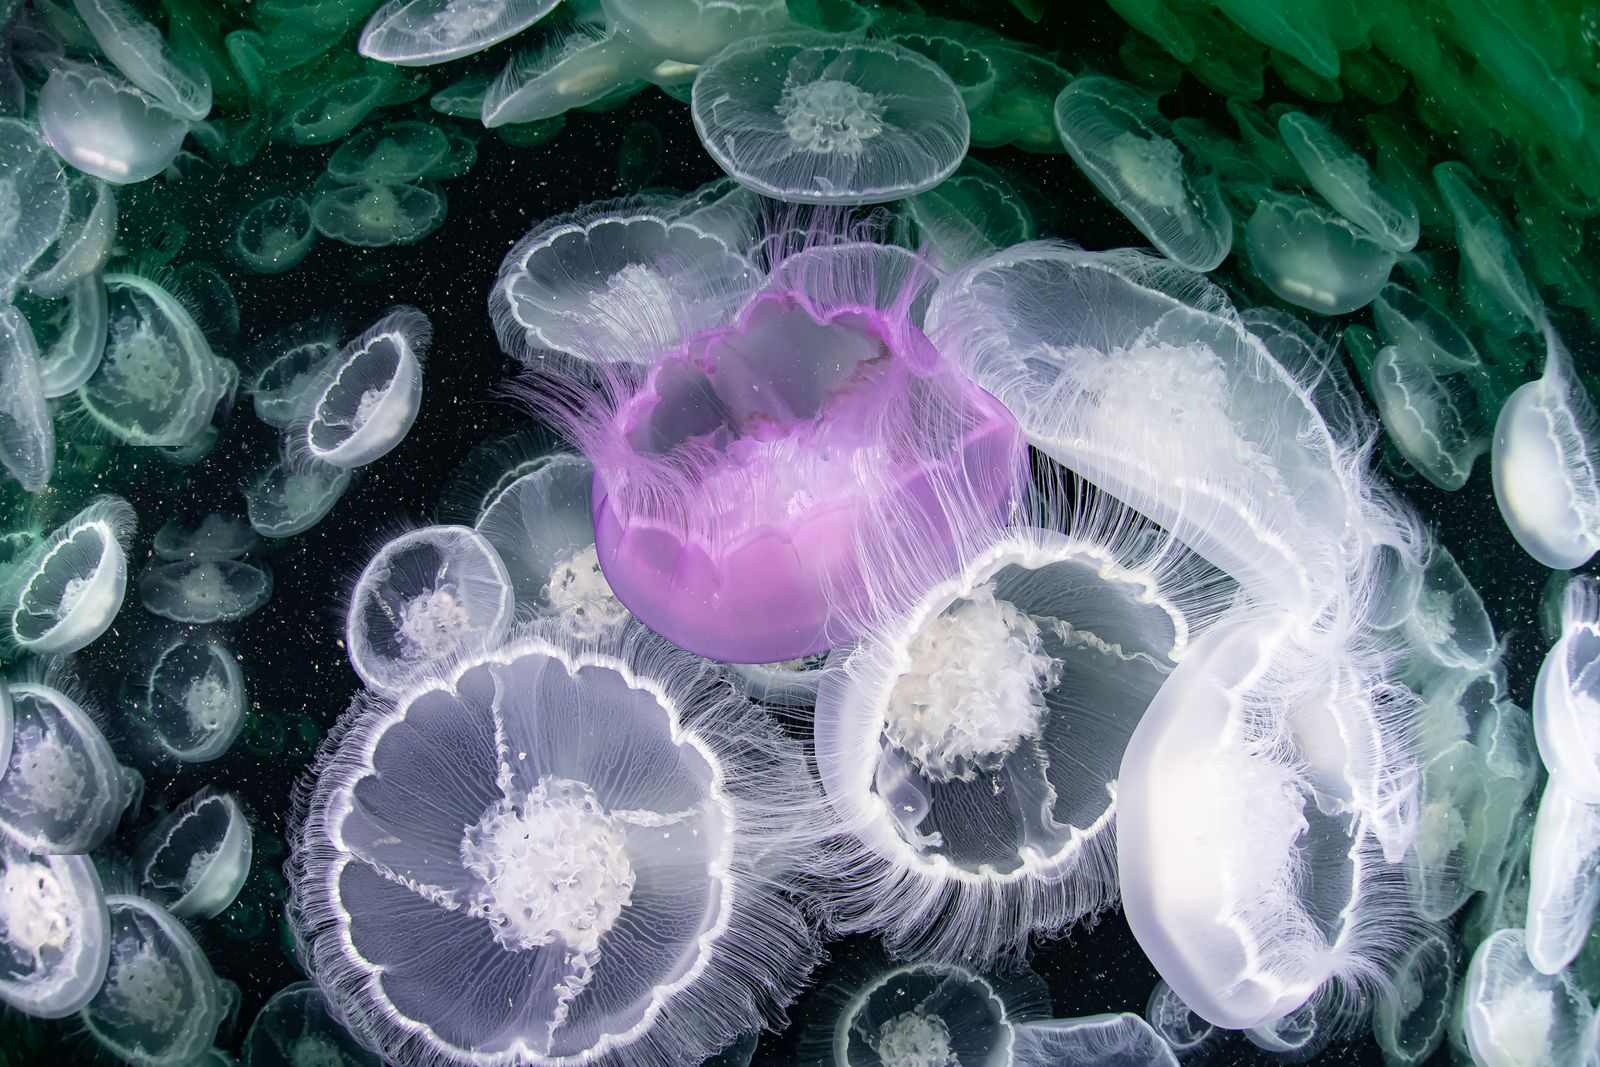 The marriage of Moon jellyfish